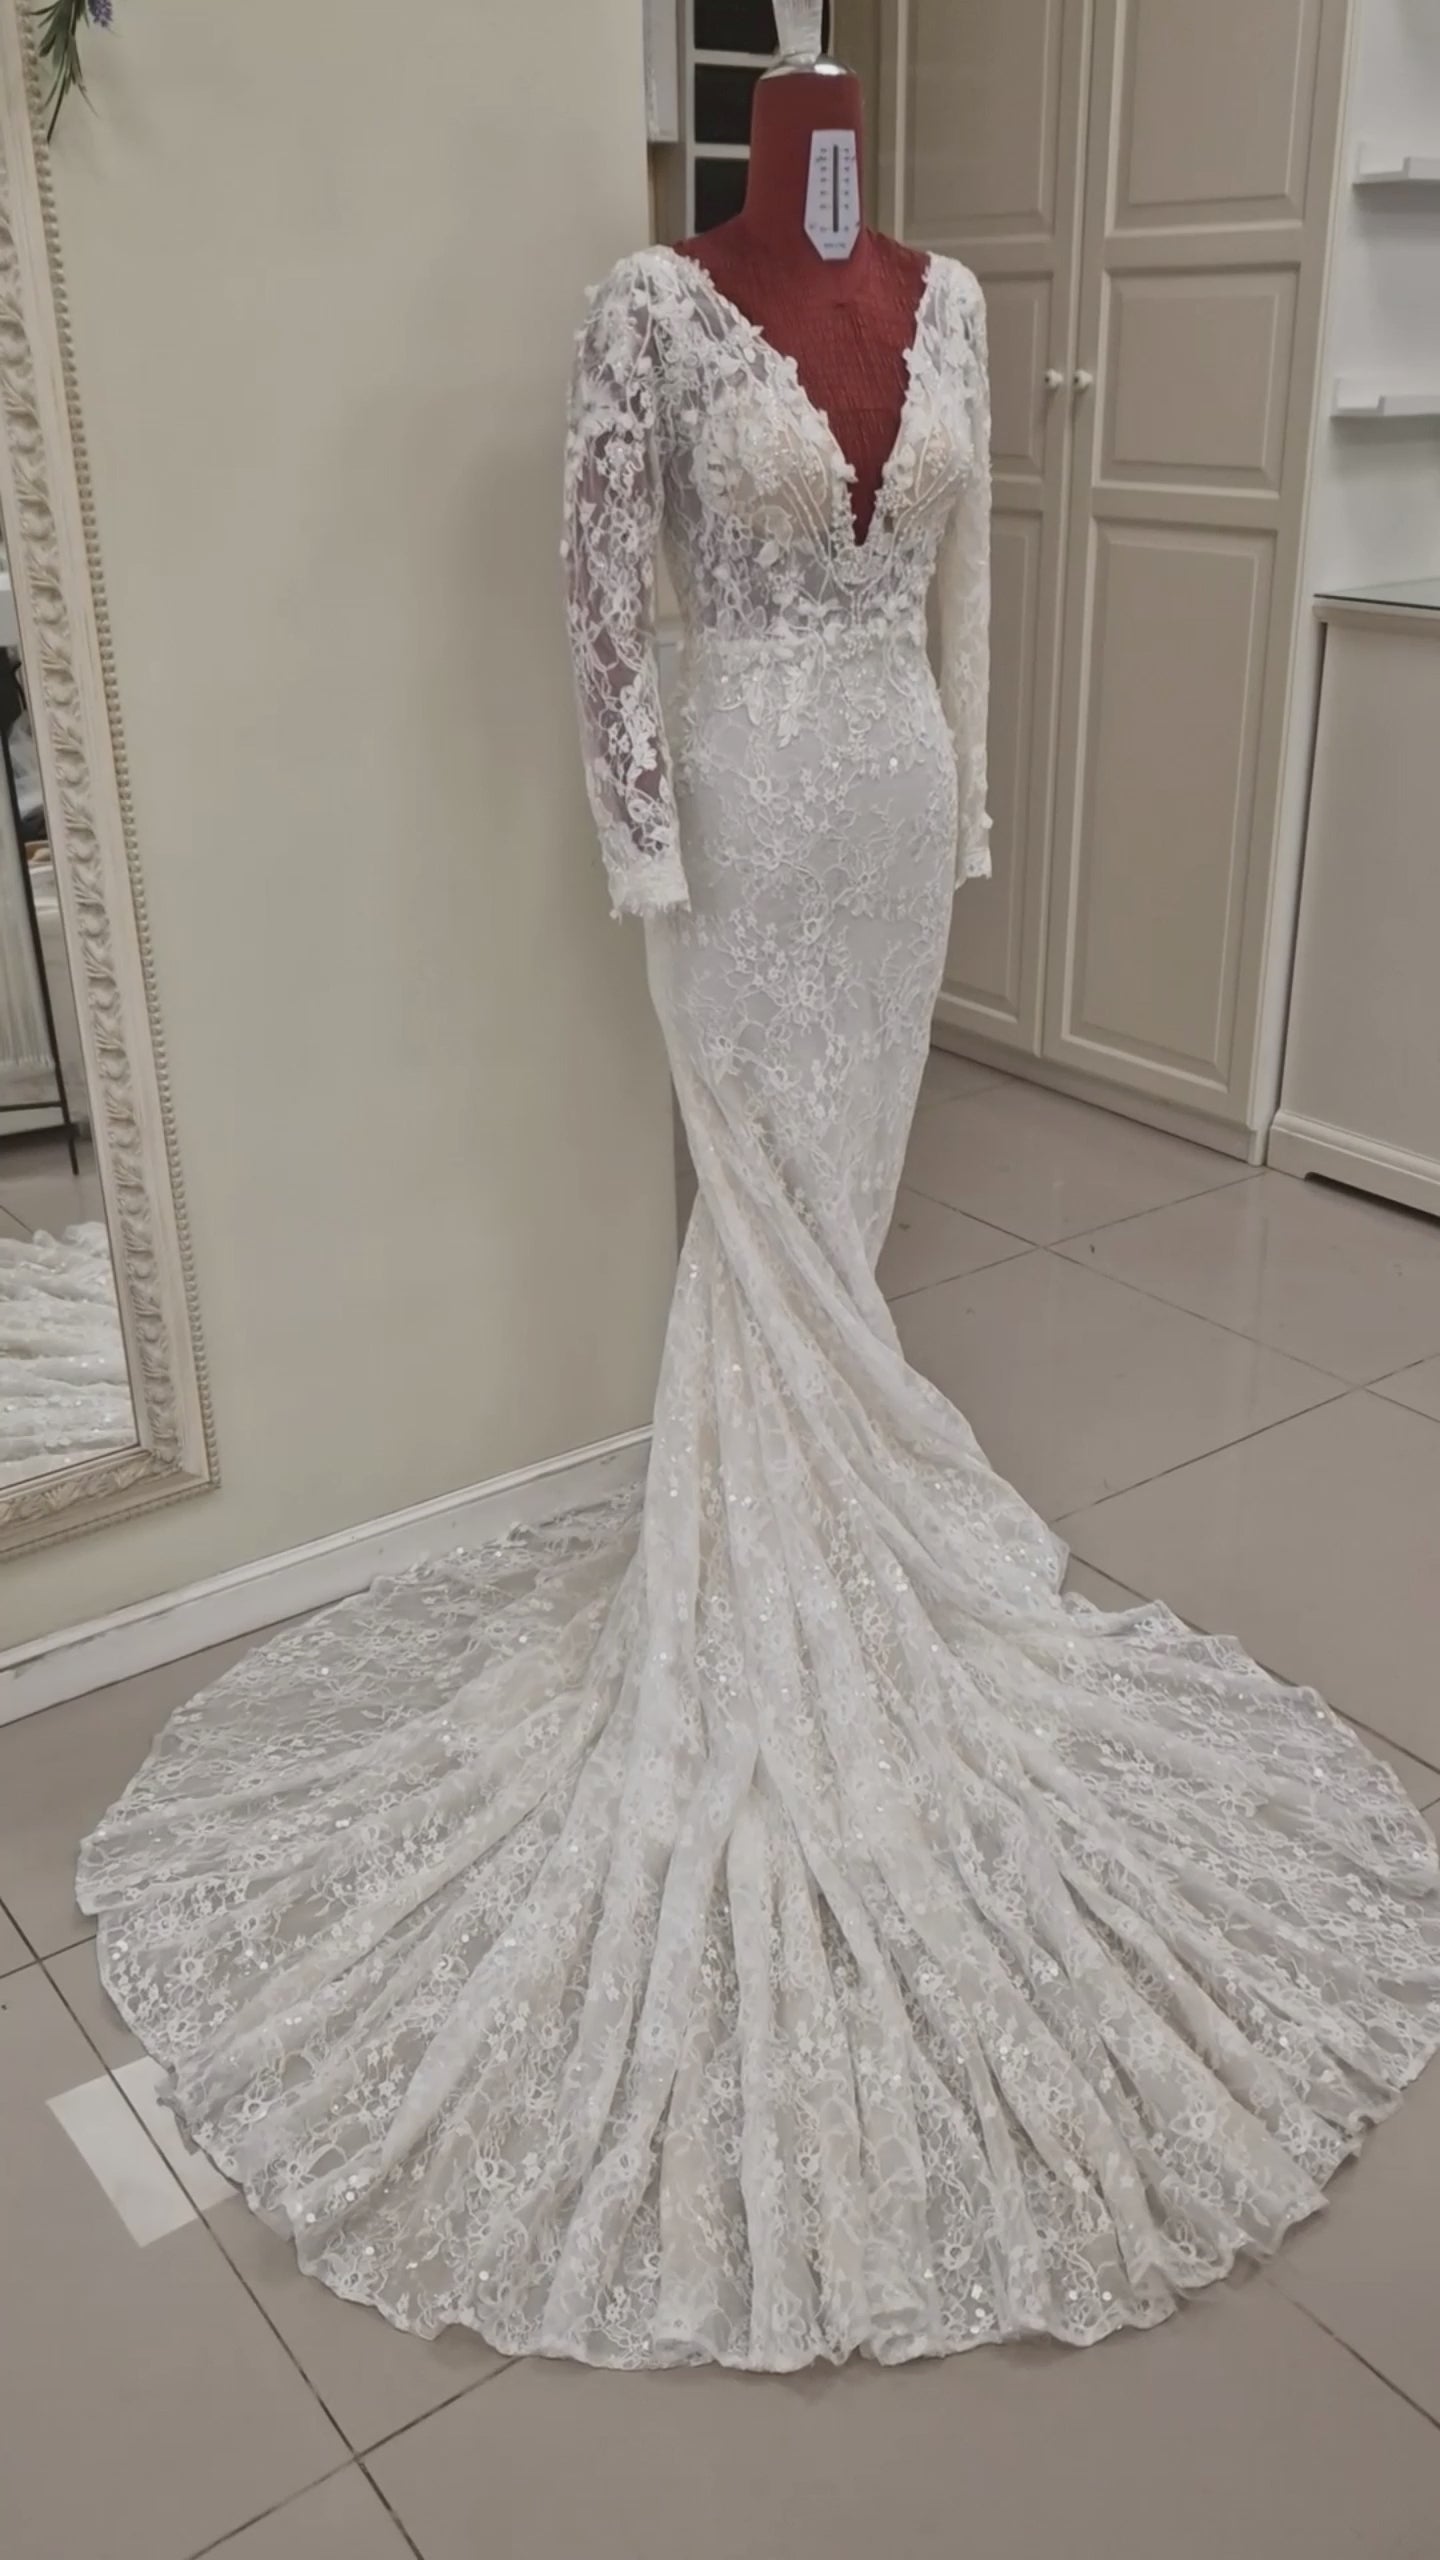 Lace wedding dress from our 2024 couture collection. The gown has a figure hugging trumpet silhouette, long sleeves, deep plunging V-neckline and V-back and lots of beading and sparkle.